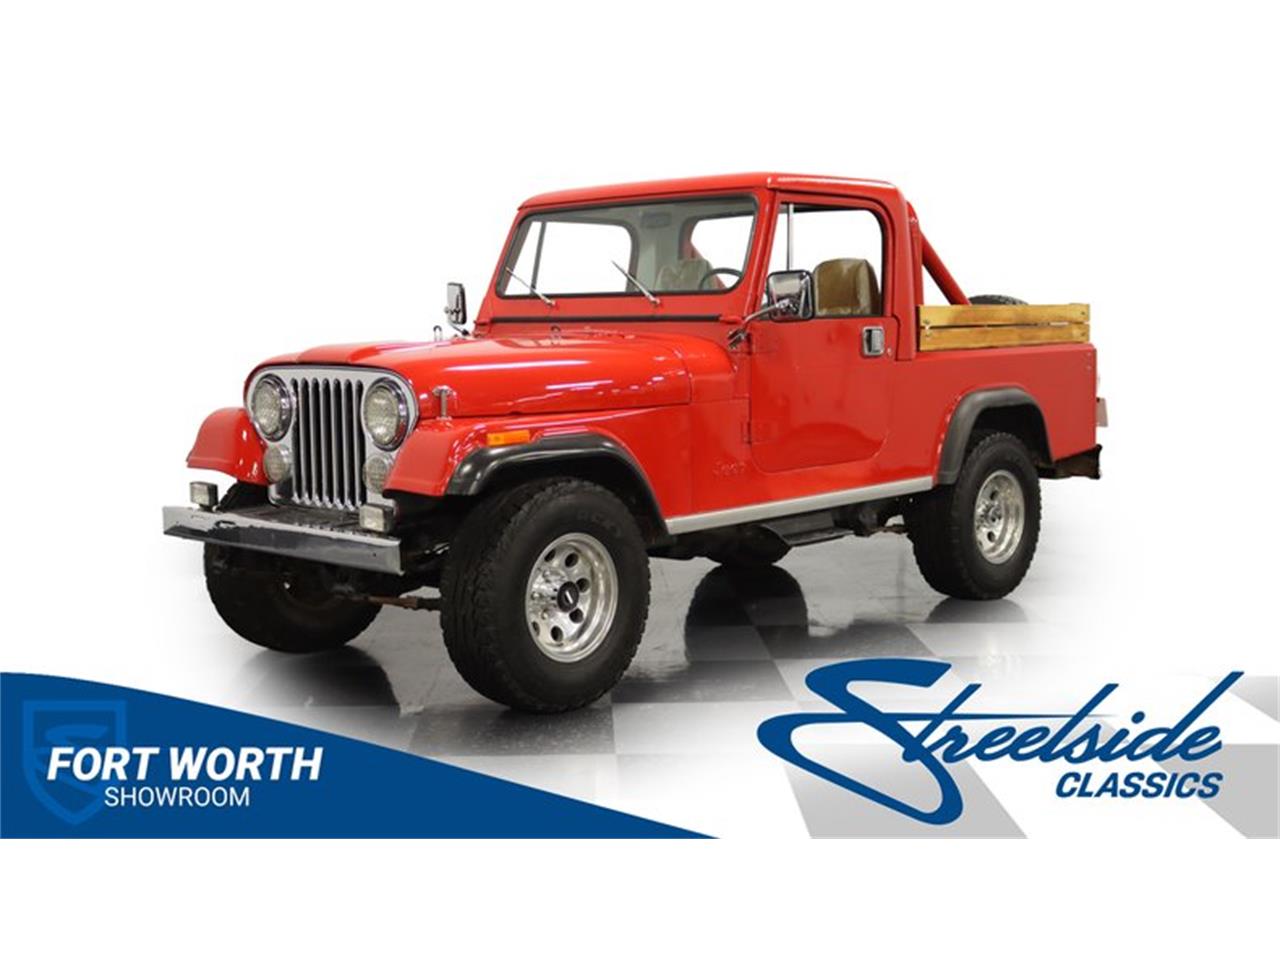 For Sale: 1981 Jeep CJ8 Scrambler in Ft Worth, Texas for sale in Fort Worth, TX